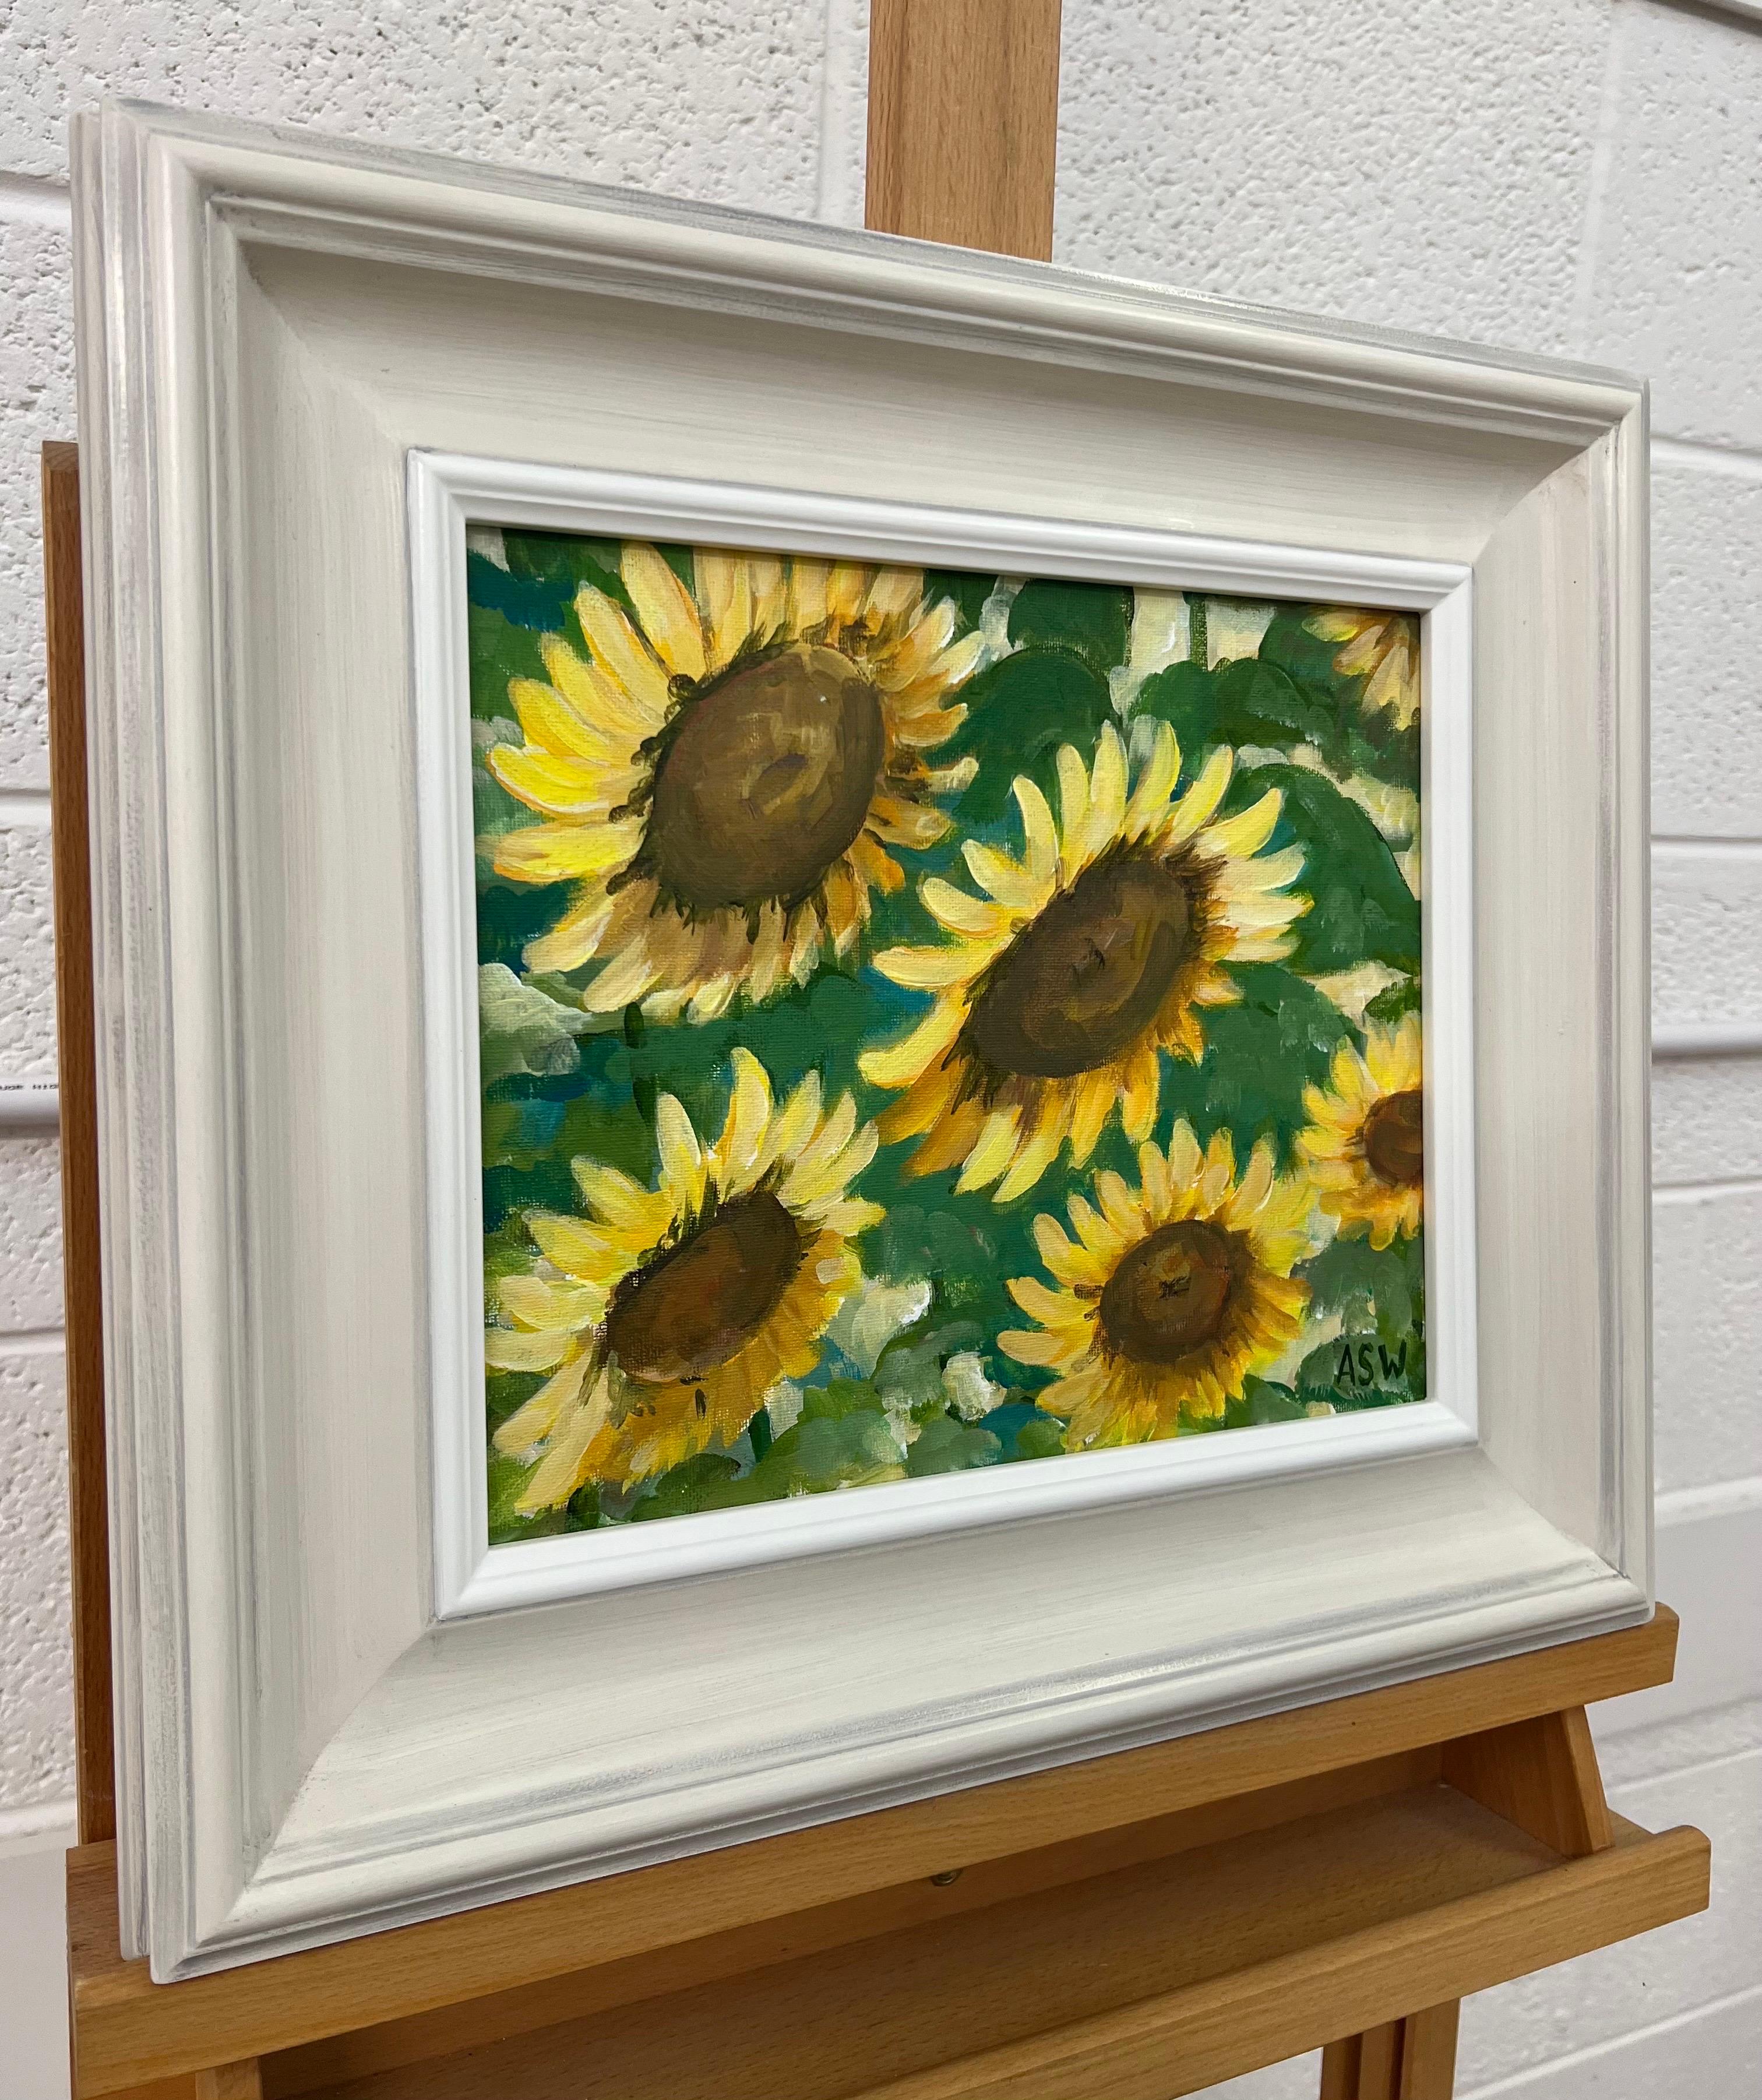 Golden Yellow Sunflowers Study on Green Background by Contemporary Artist - Painting by Angela Wakefield